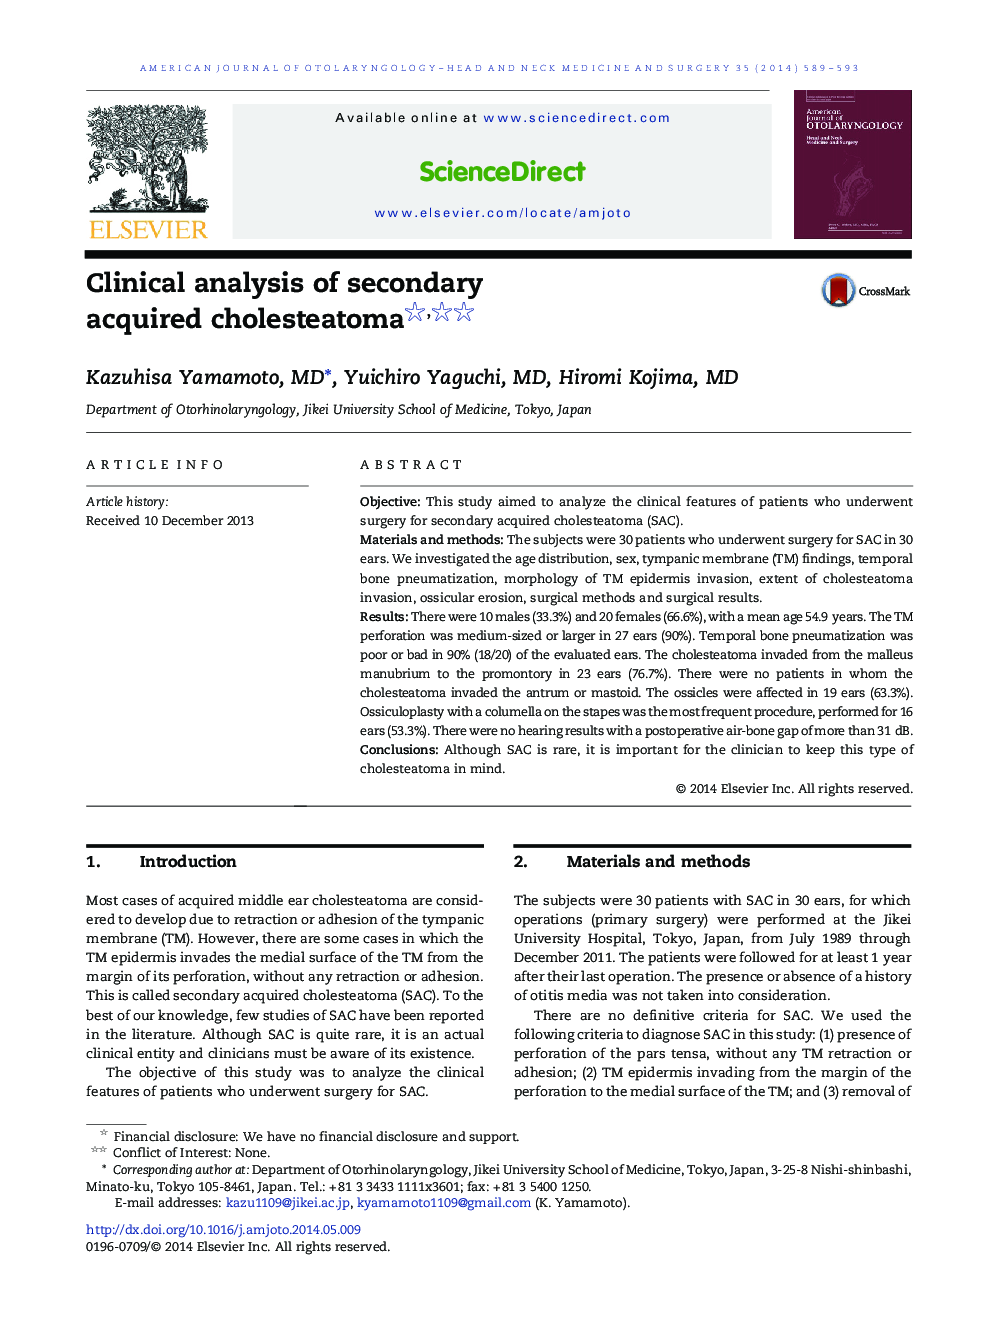 Clinical analysis of secondary acquired cholesteatoma 